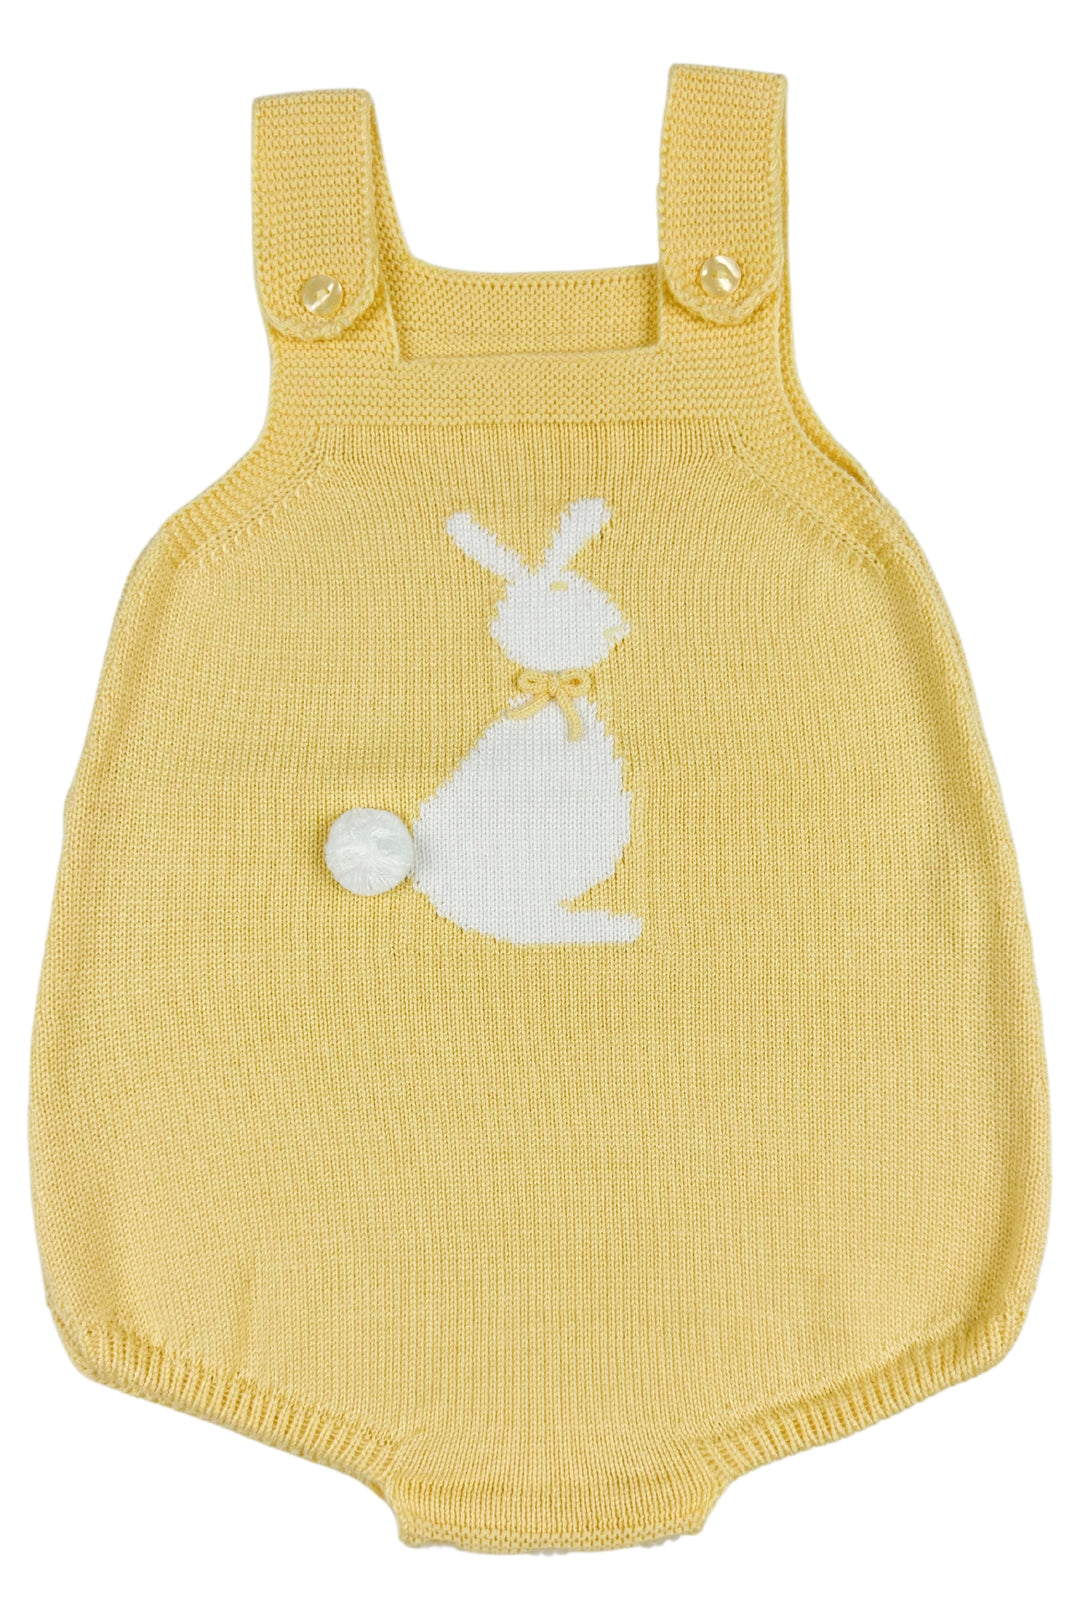 Granlei "Roux" Pale Yellow Knit Bunny Dungaree Romper | Millie and John